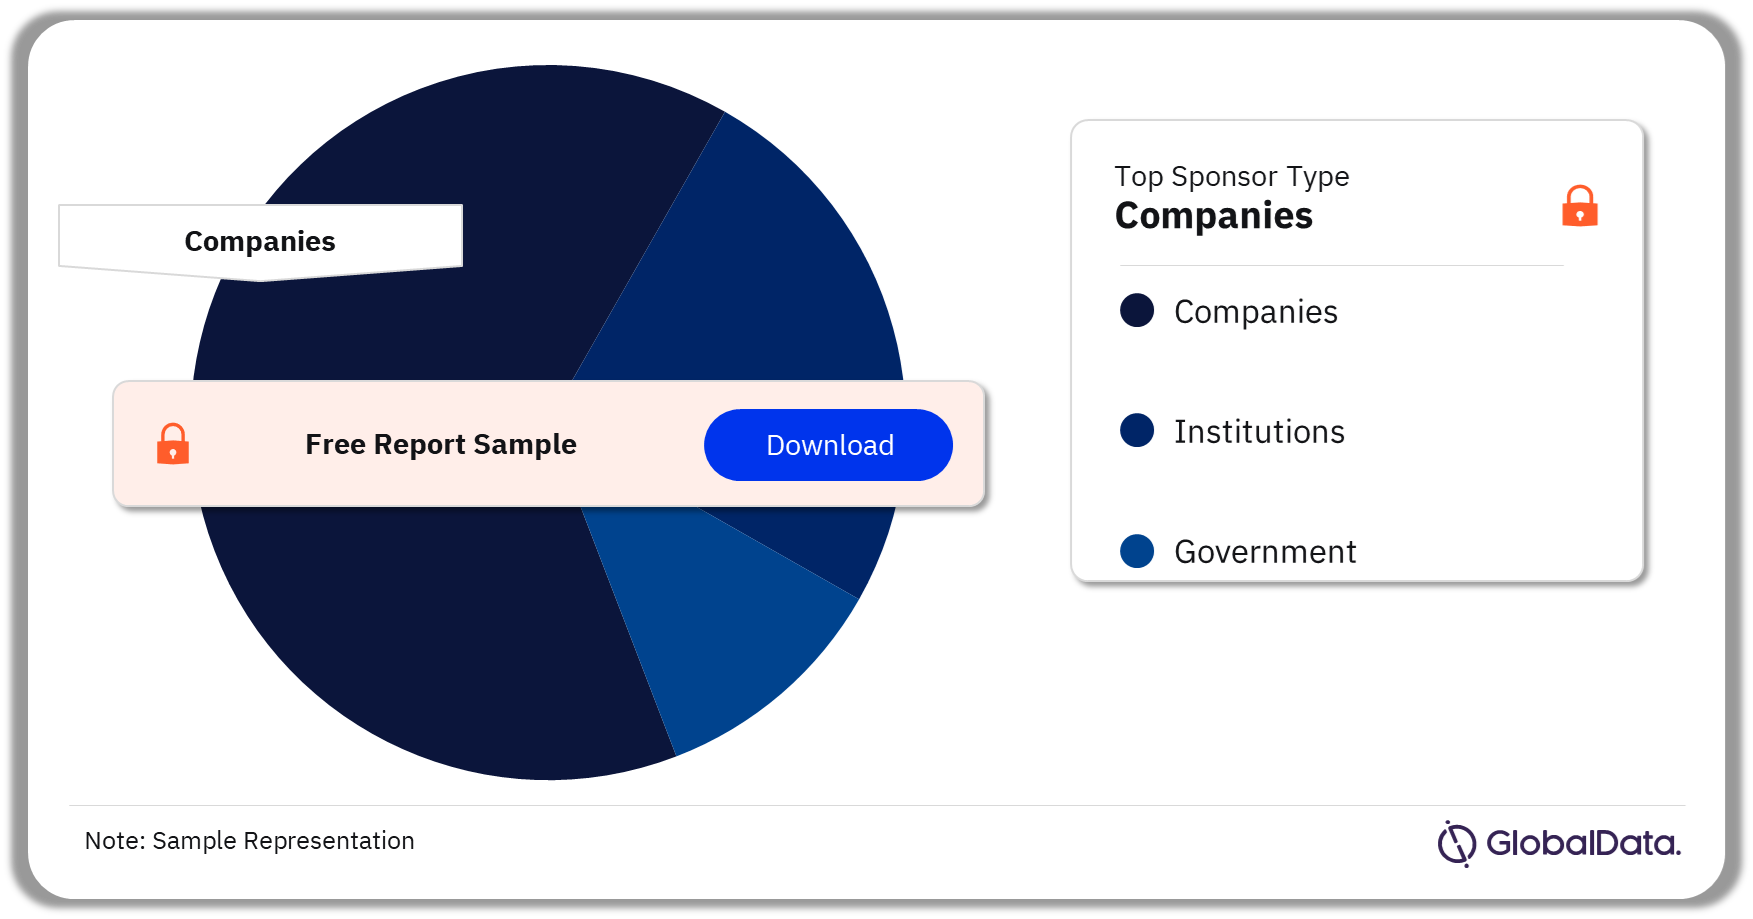 Renal Cell Carcinoma Clinical Trials Market Analysis by Sponsor Types, 2023 (%)